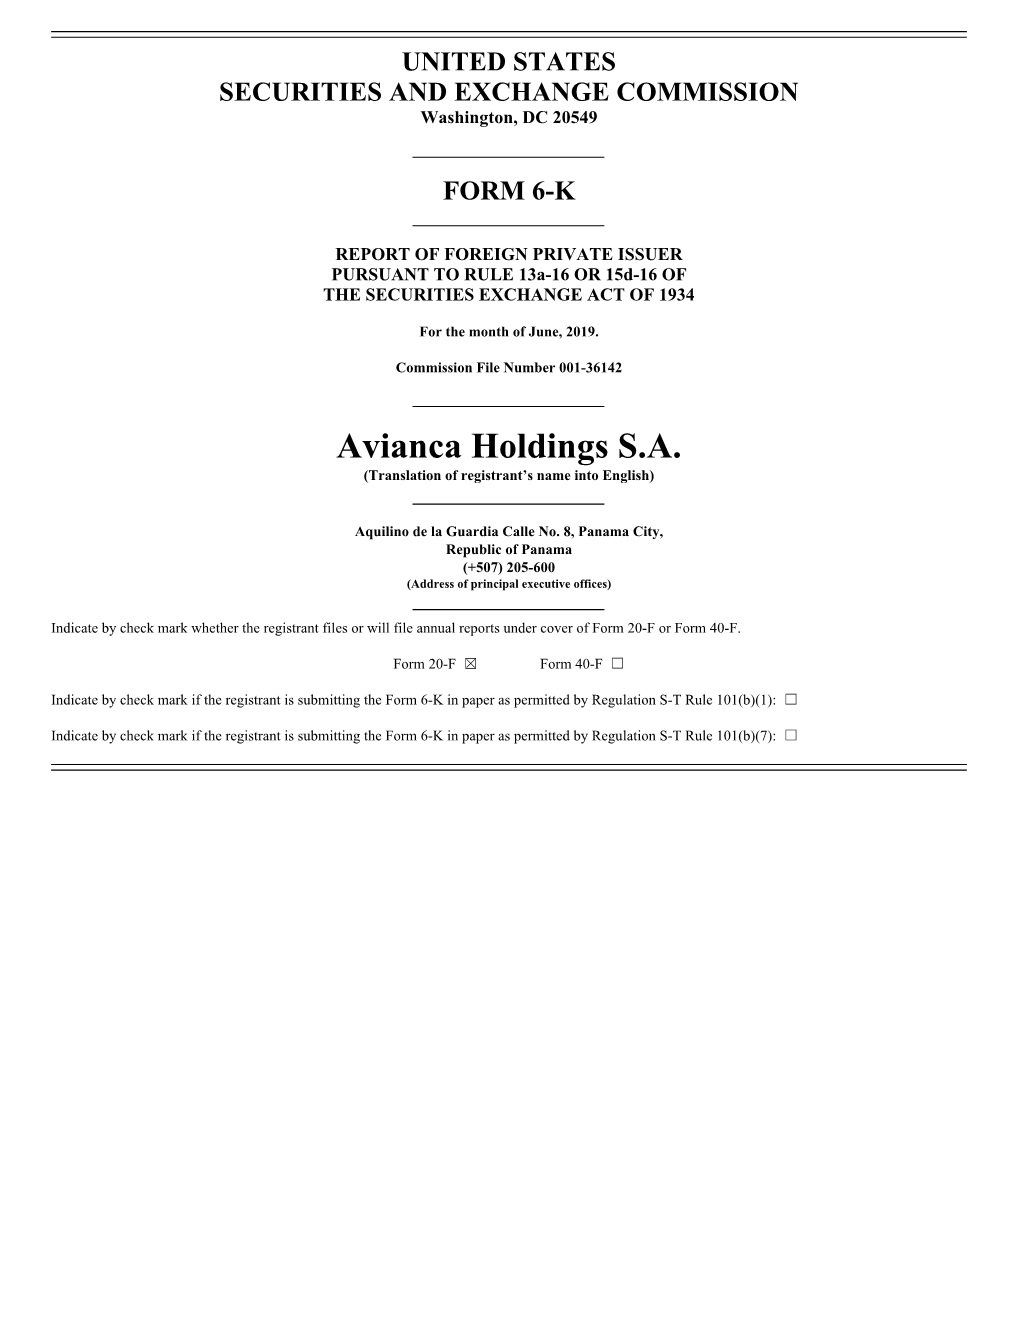 Avianca Holdings S.A. (Translation of Registrant’S Name Into English)